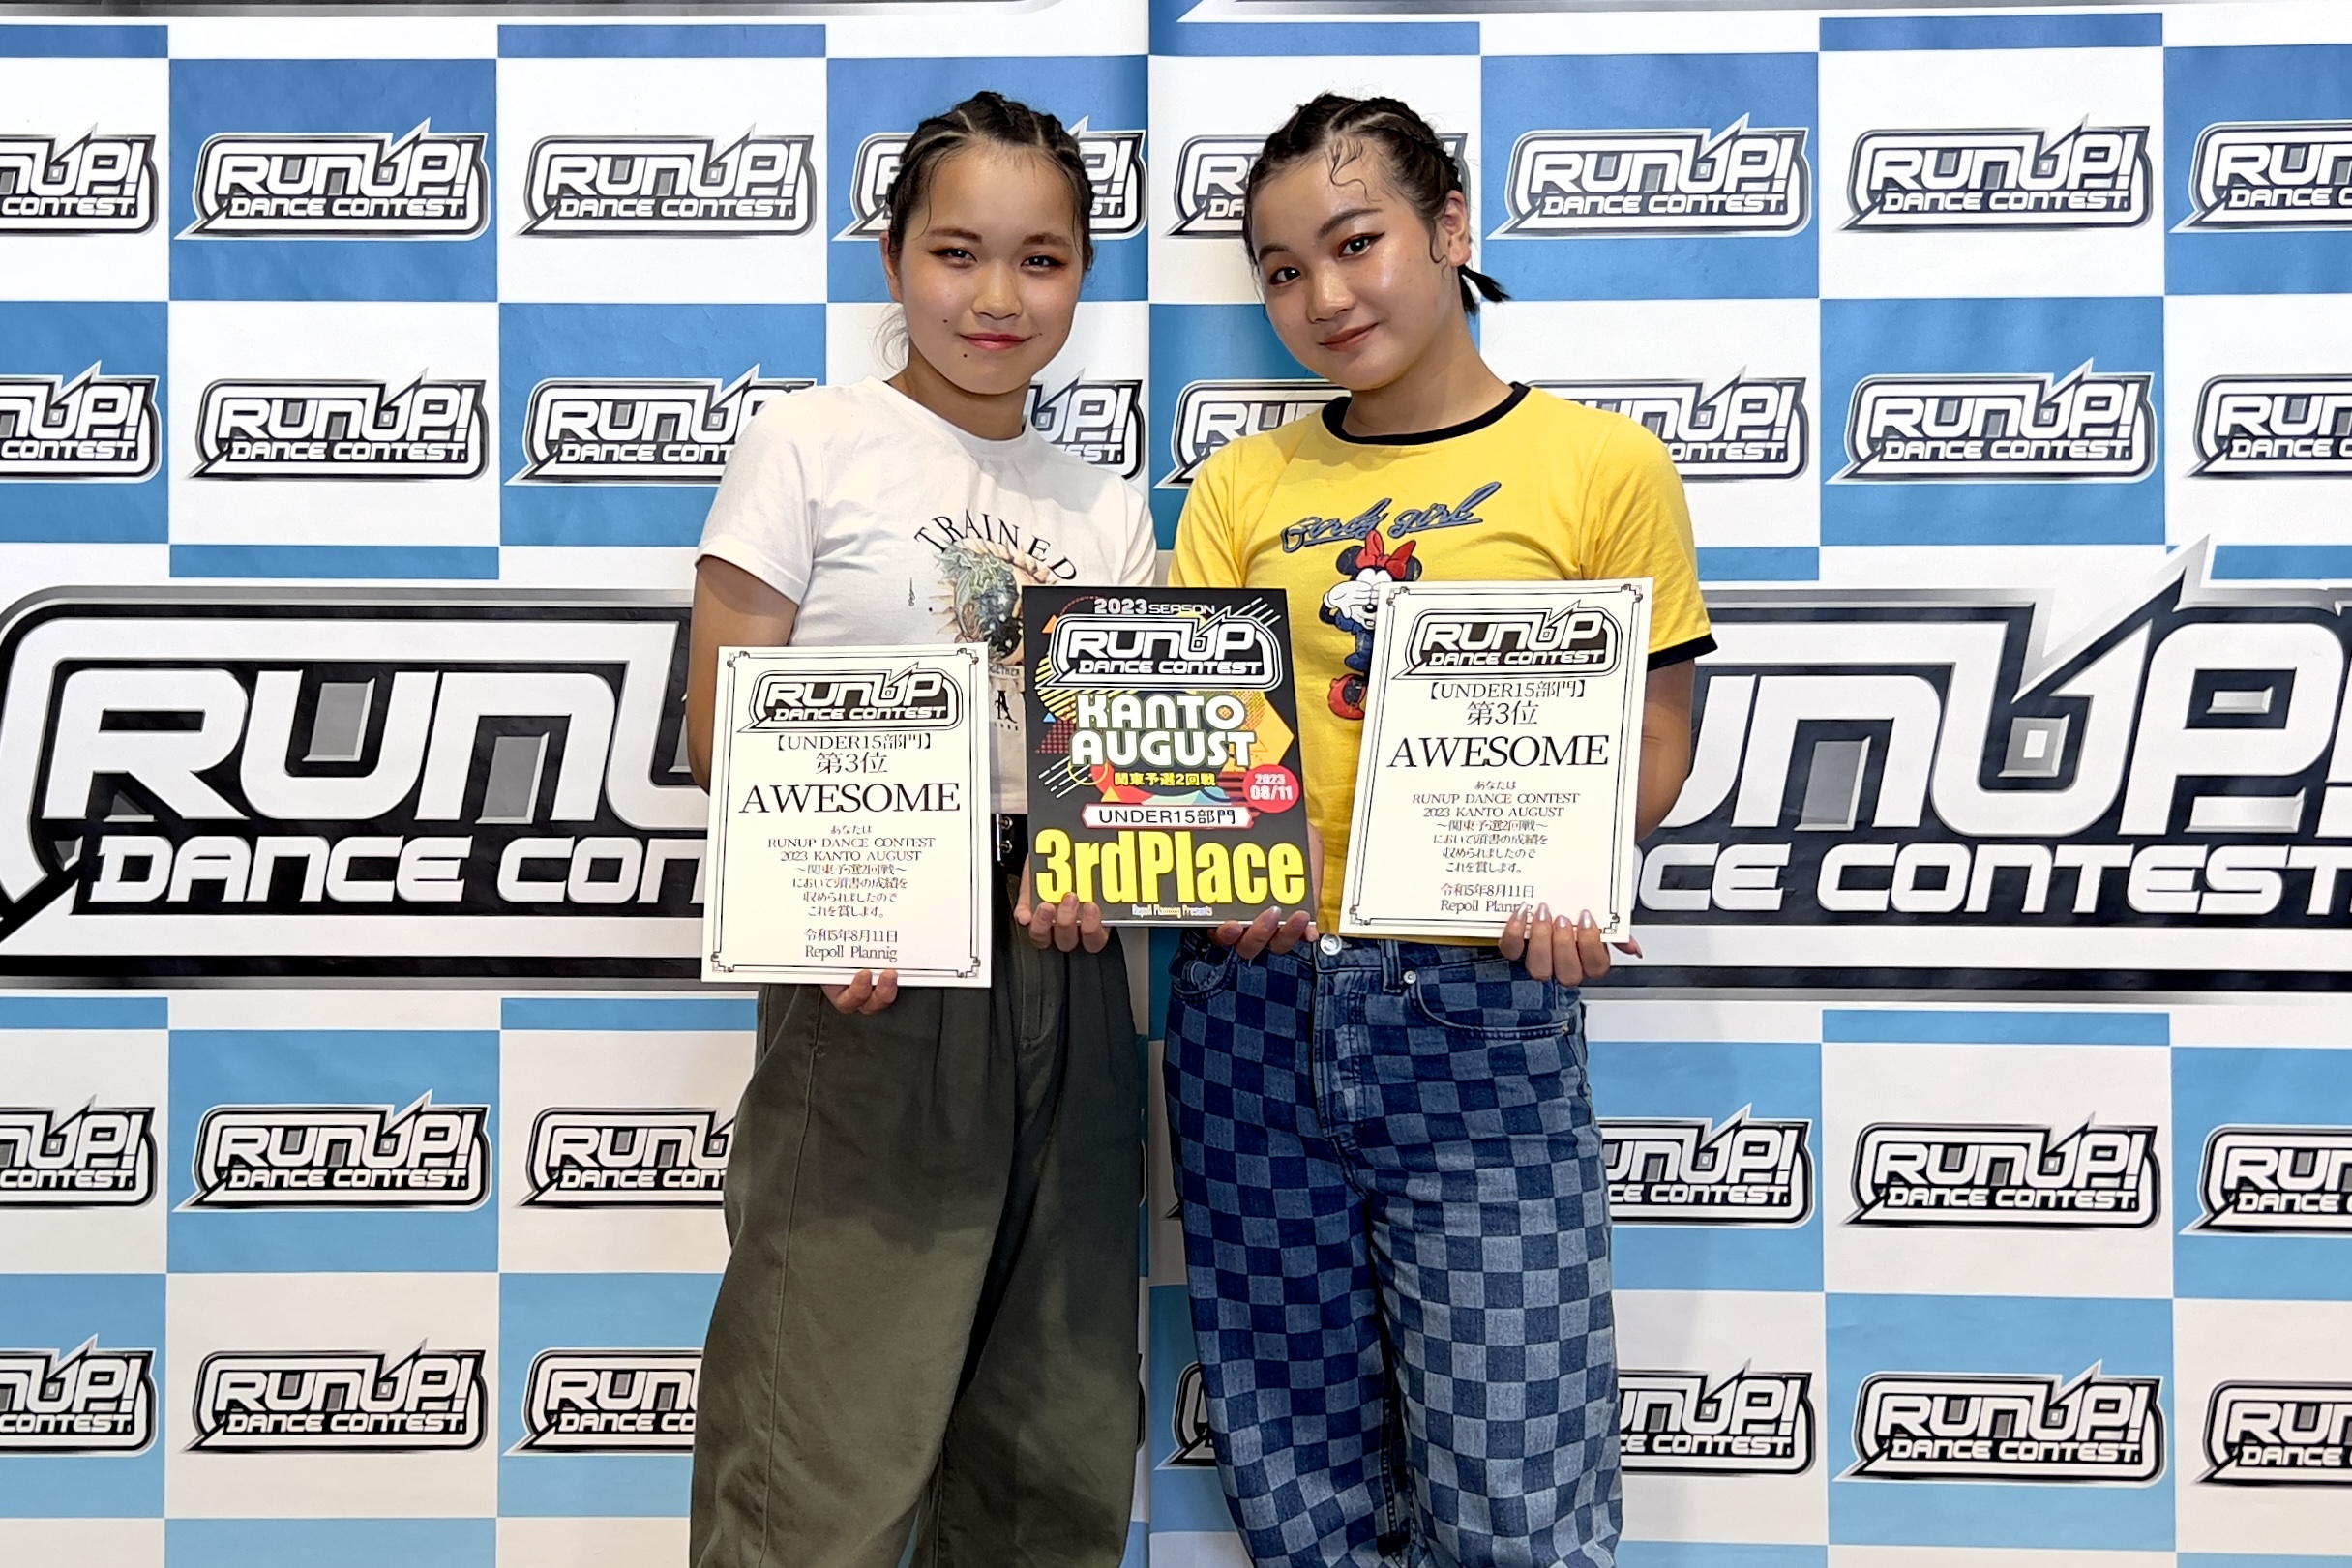 RUNUP 2023 KANTO AUGUST UNDER15 第3位 AWESOME